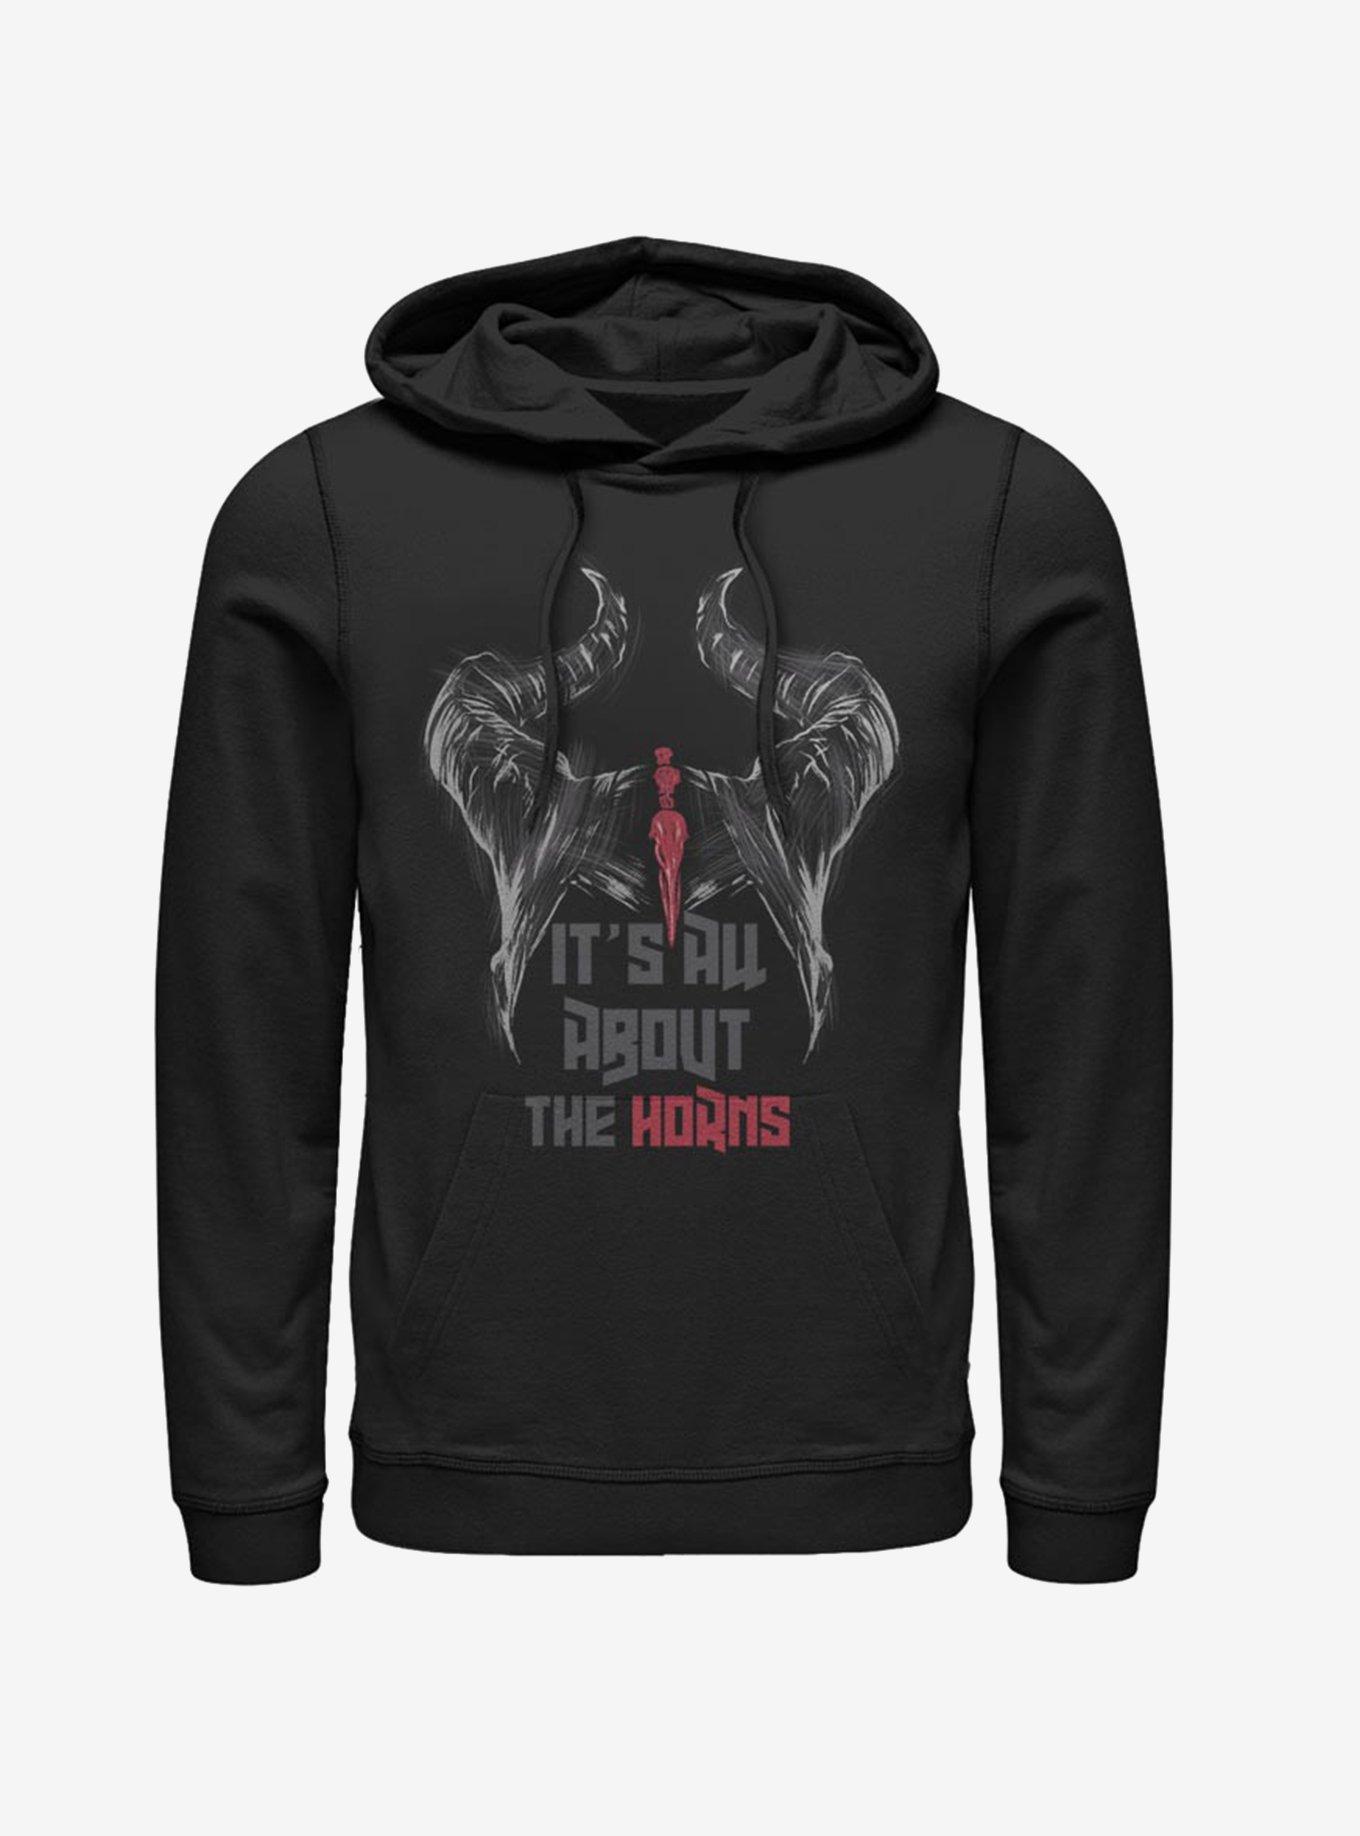 Disney Maleficent: Mistress Of Evil It's All About The Horns Hoodie, BLACK, hi-res